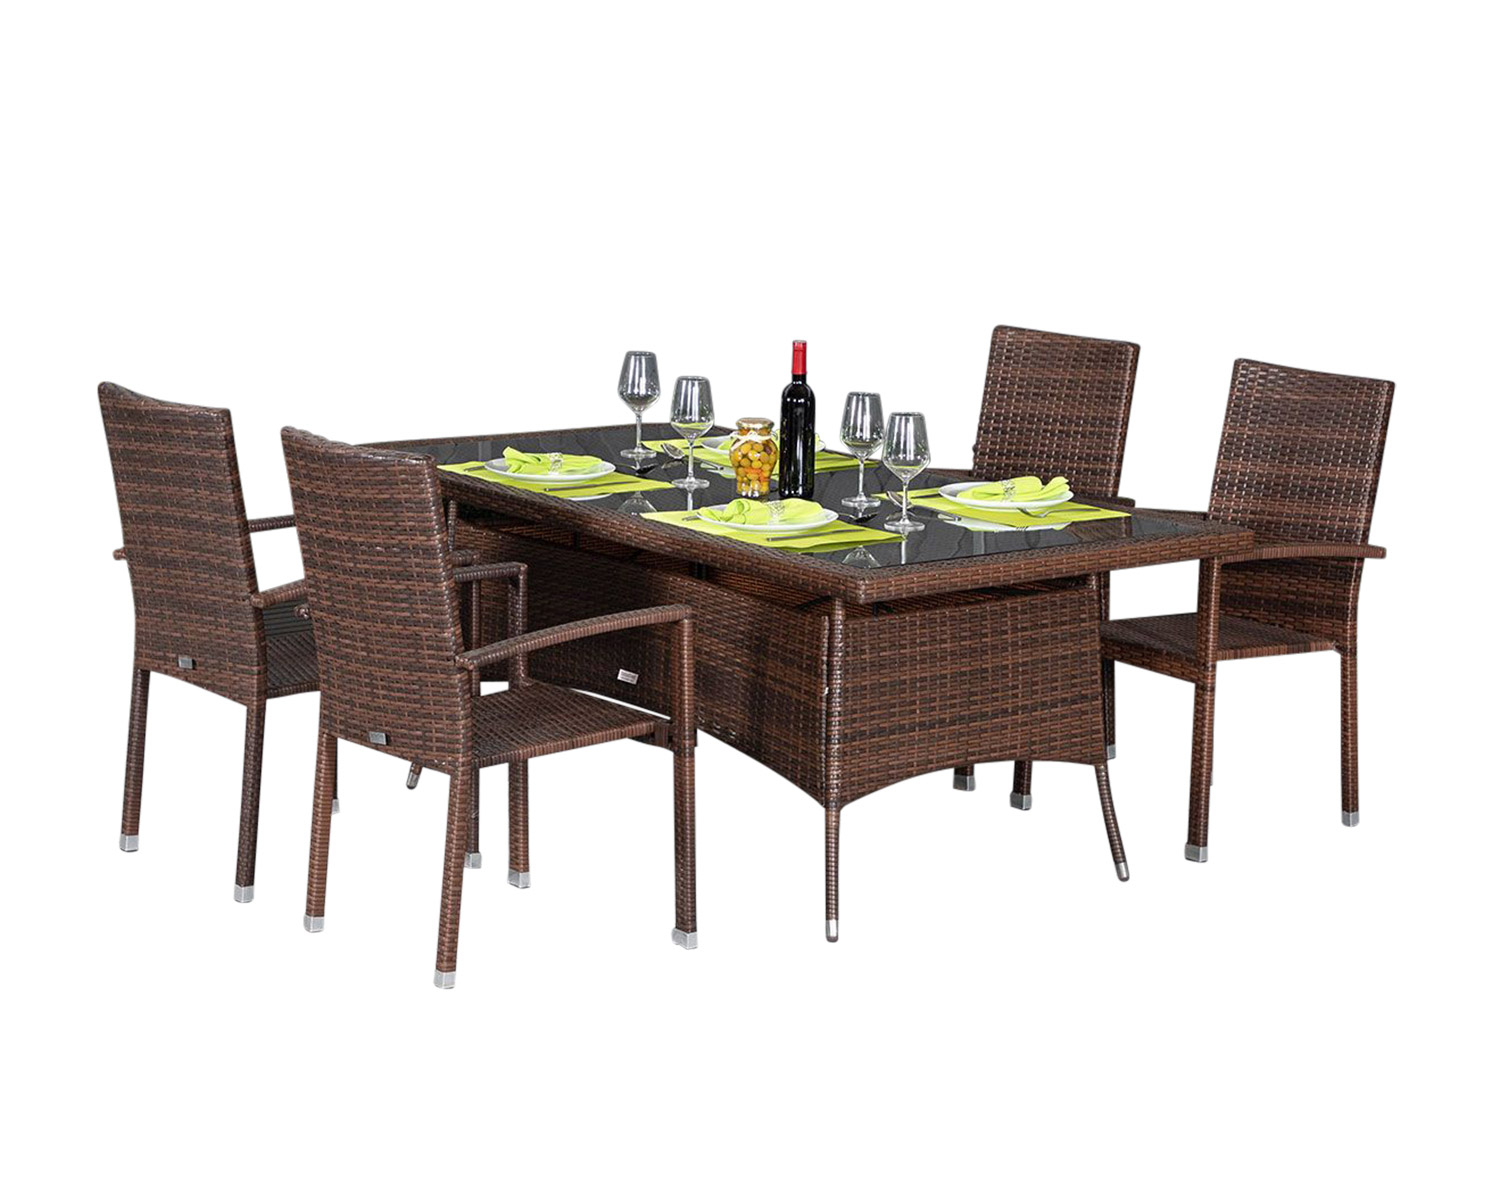 4 Seat Rattan Garden Dining Set With Large Rectangular Dining Table In Brown Rio Rattan Direct